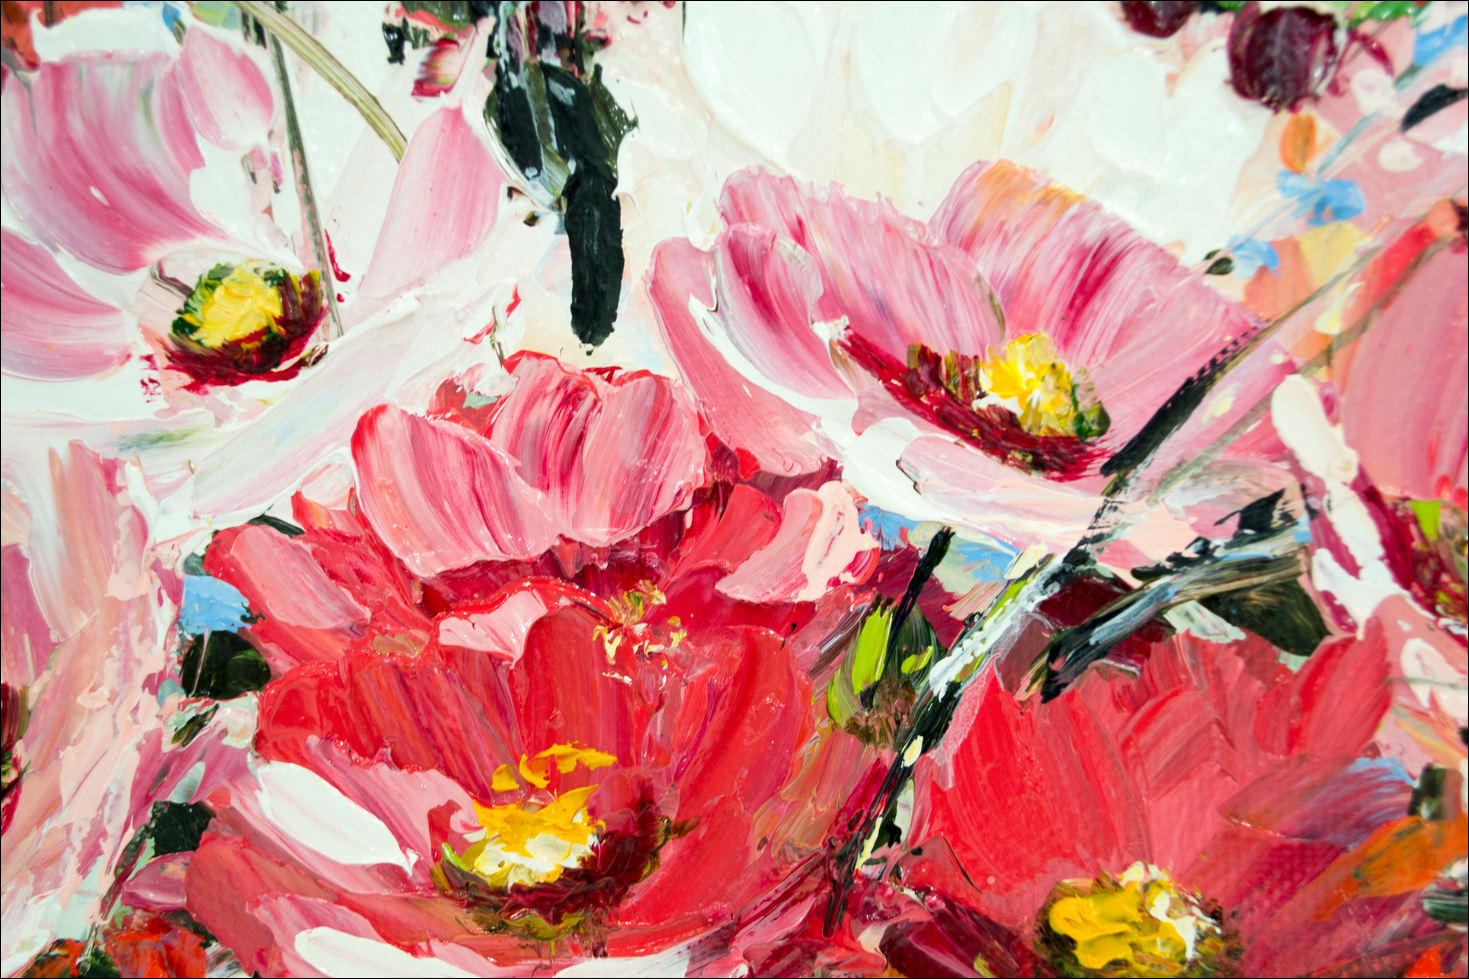 Close Up Detail Of Oil Painting "Fresh Flowers" By Judith Dalozzo